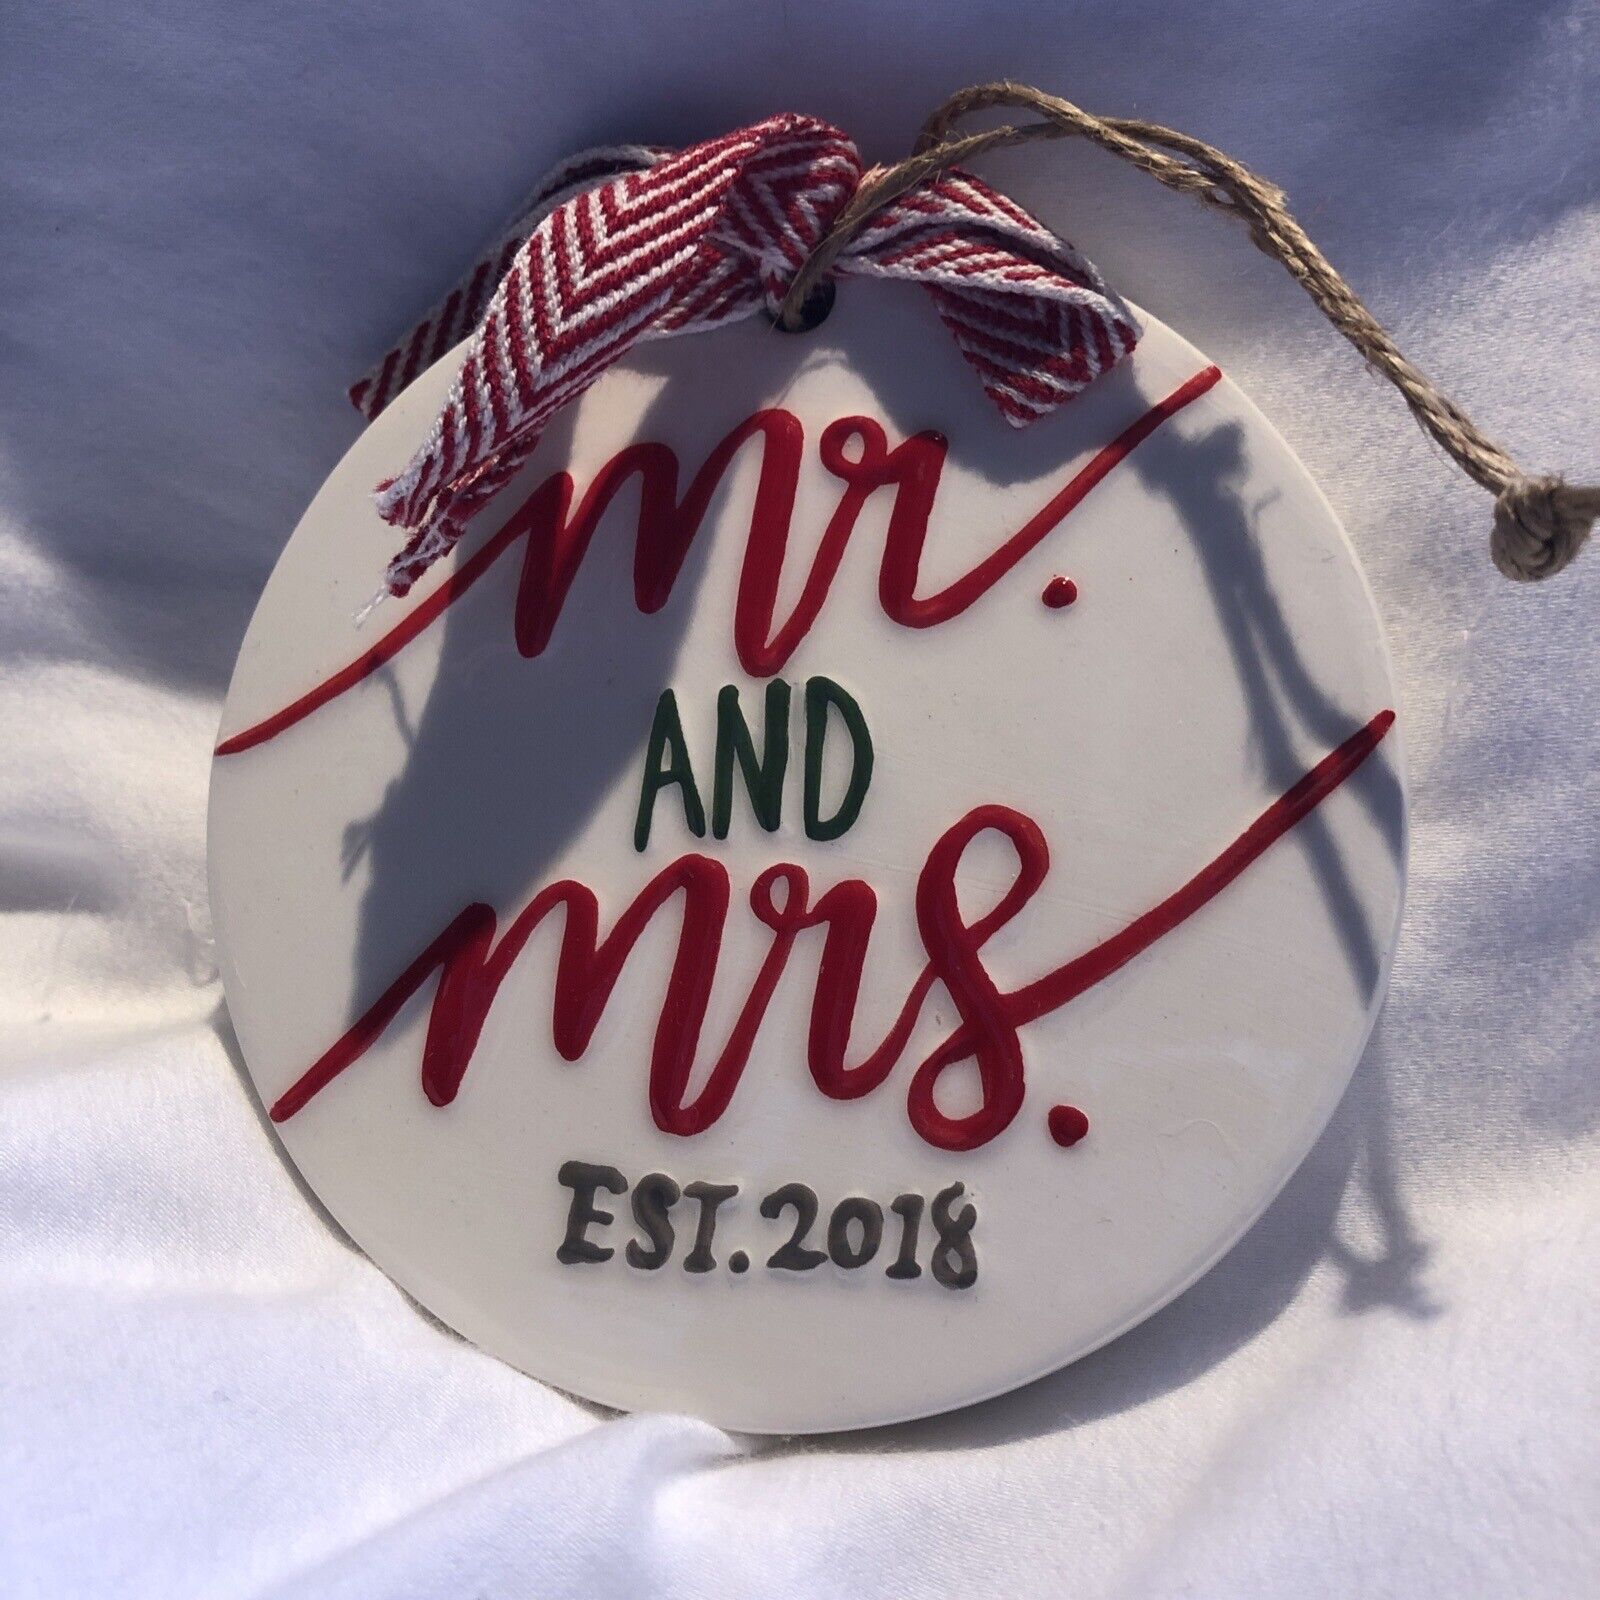 Mr & Mrs 2018 Christmas Ornament Ceramic Red And Green Striped Ribbon 4”